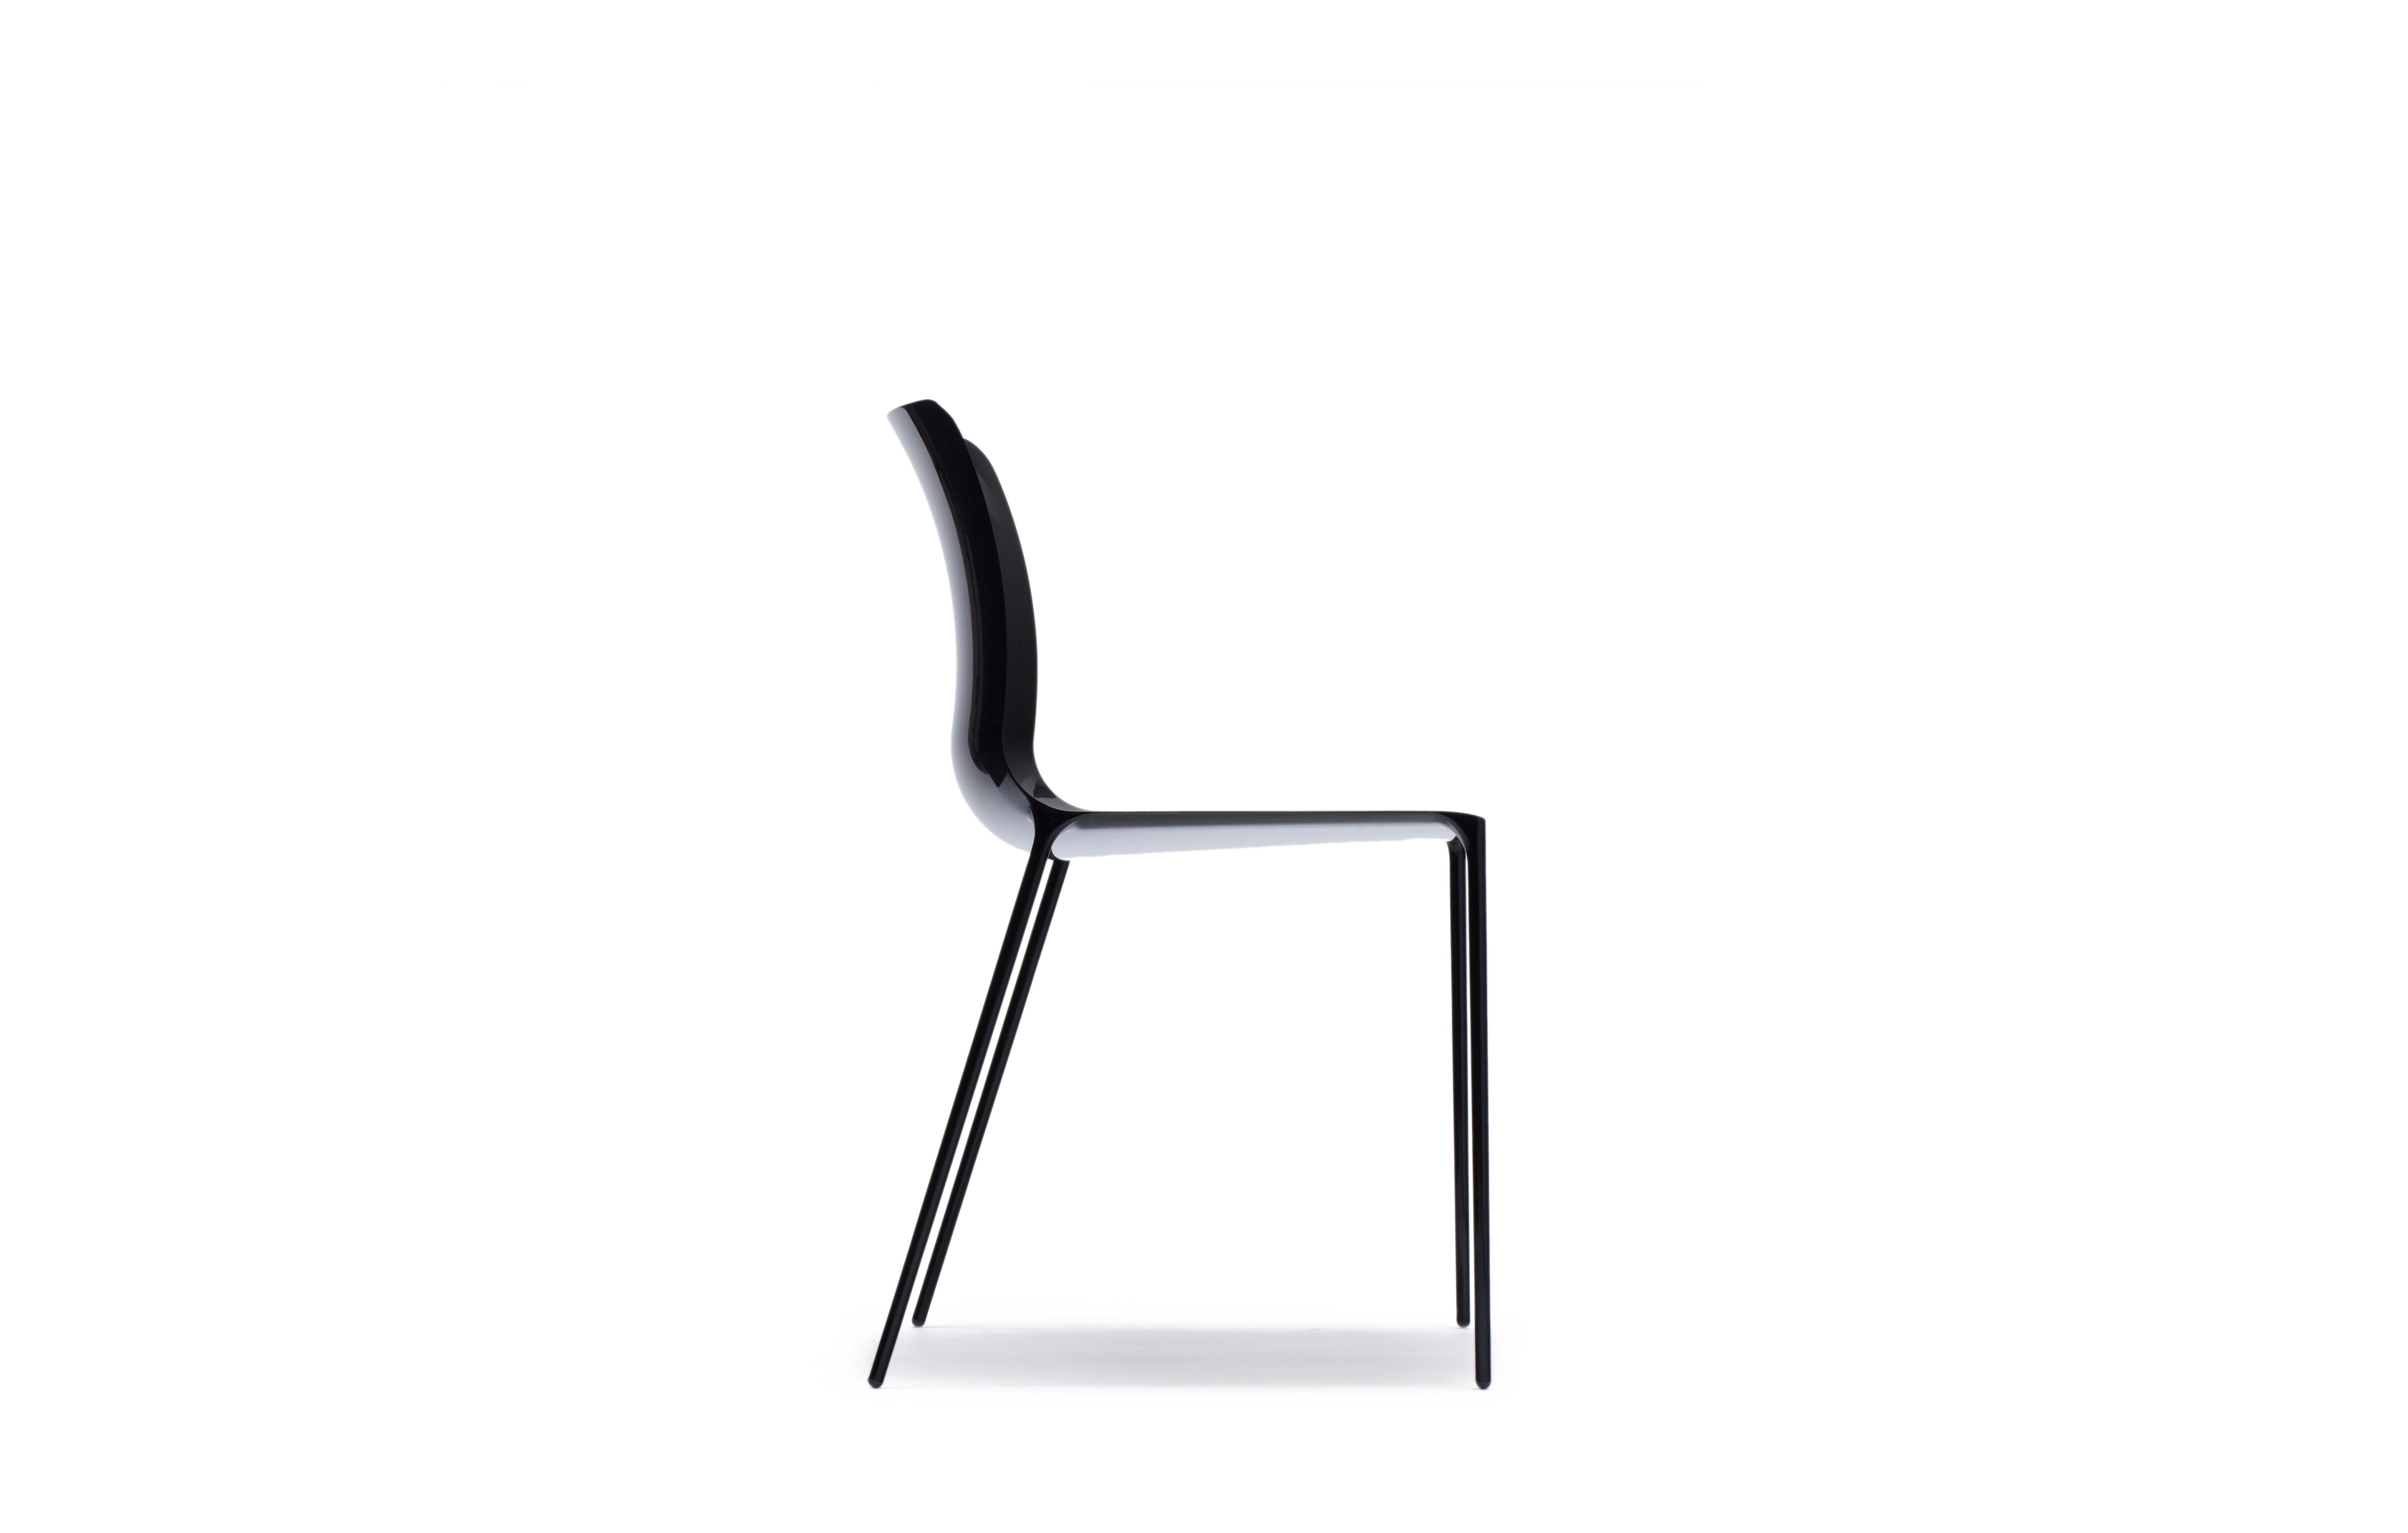 Two Royal Designers for Industry, one from the world of furniture design, and one from the world of Formula 1 racing car design collaborated. With an almost impossibly thin profile, the Surface chair is made from carbon fibre, using cutting-edge